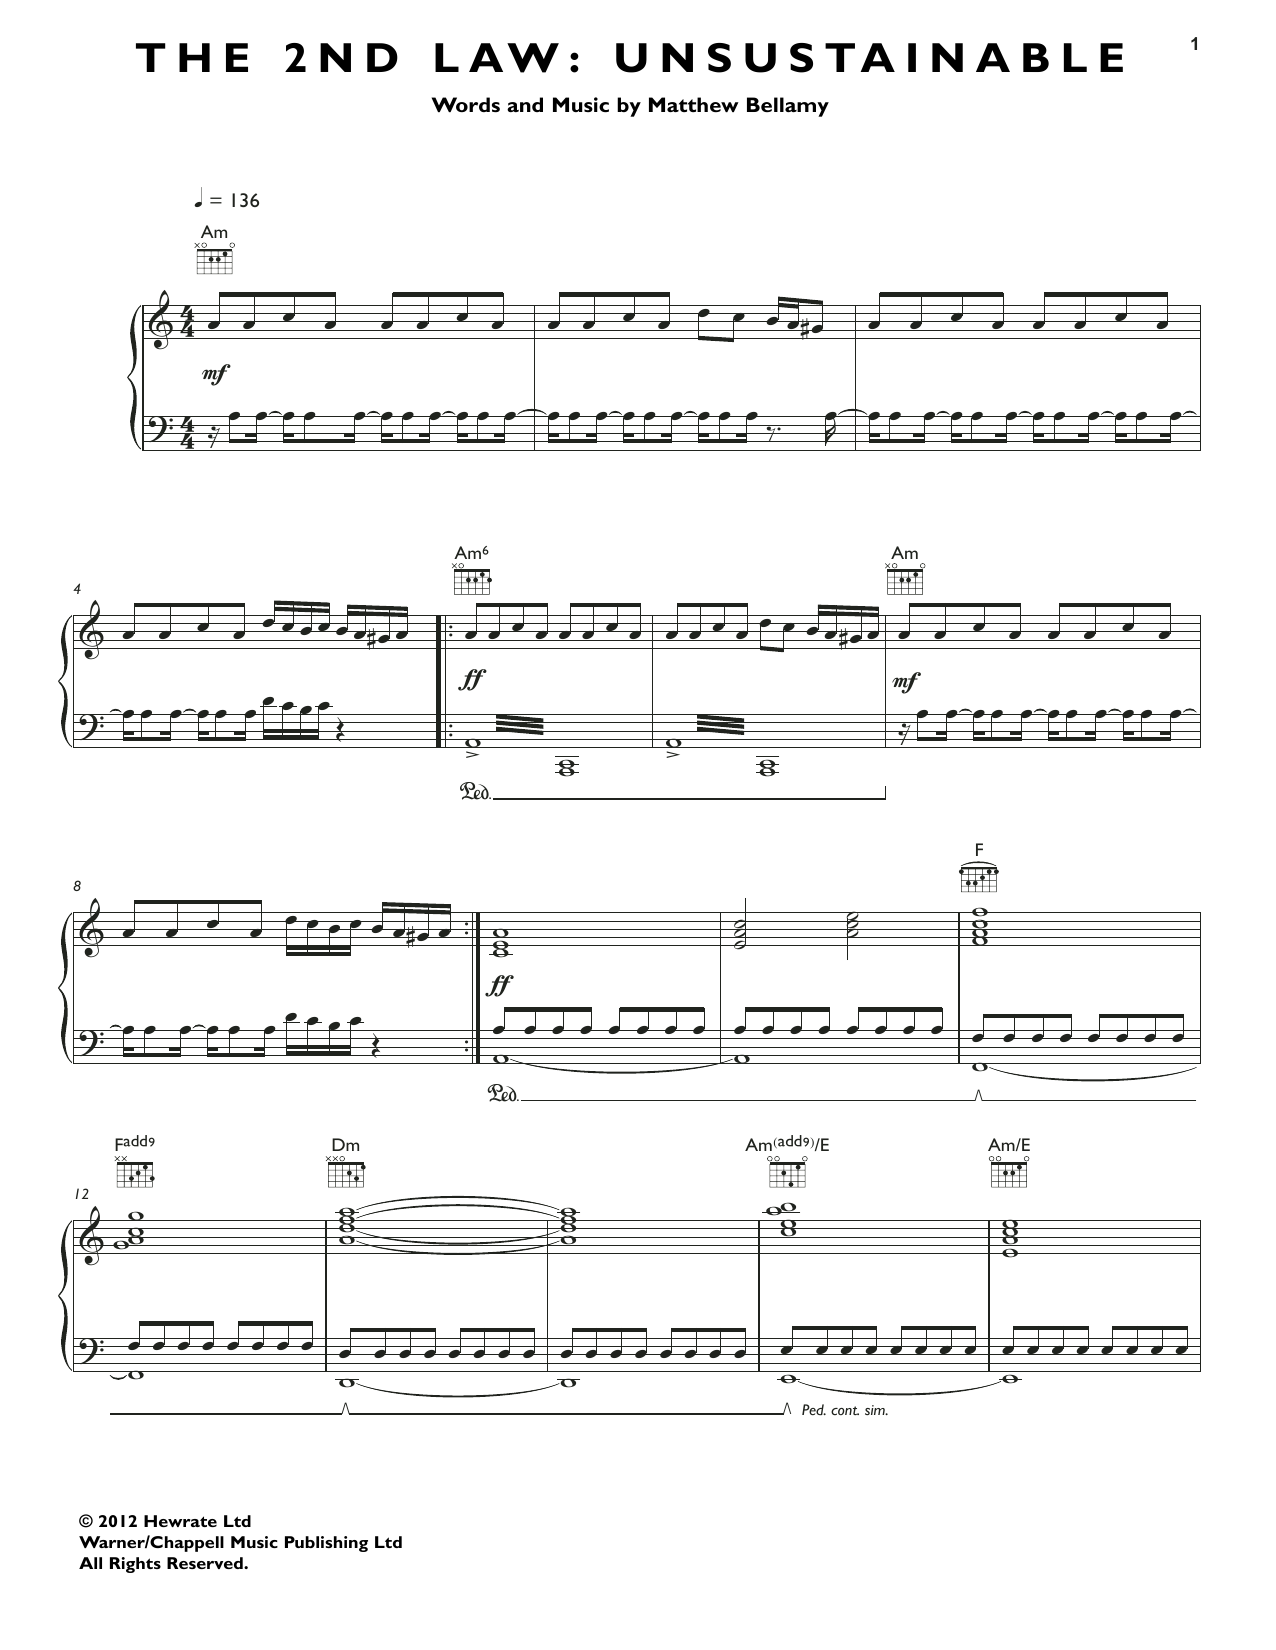 Download Muse The 2nd Law: Unsustainable Sheet Music